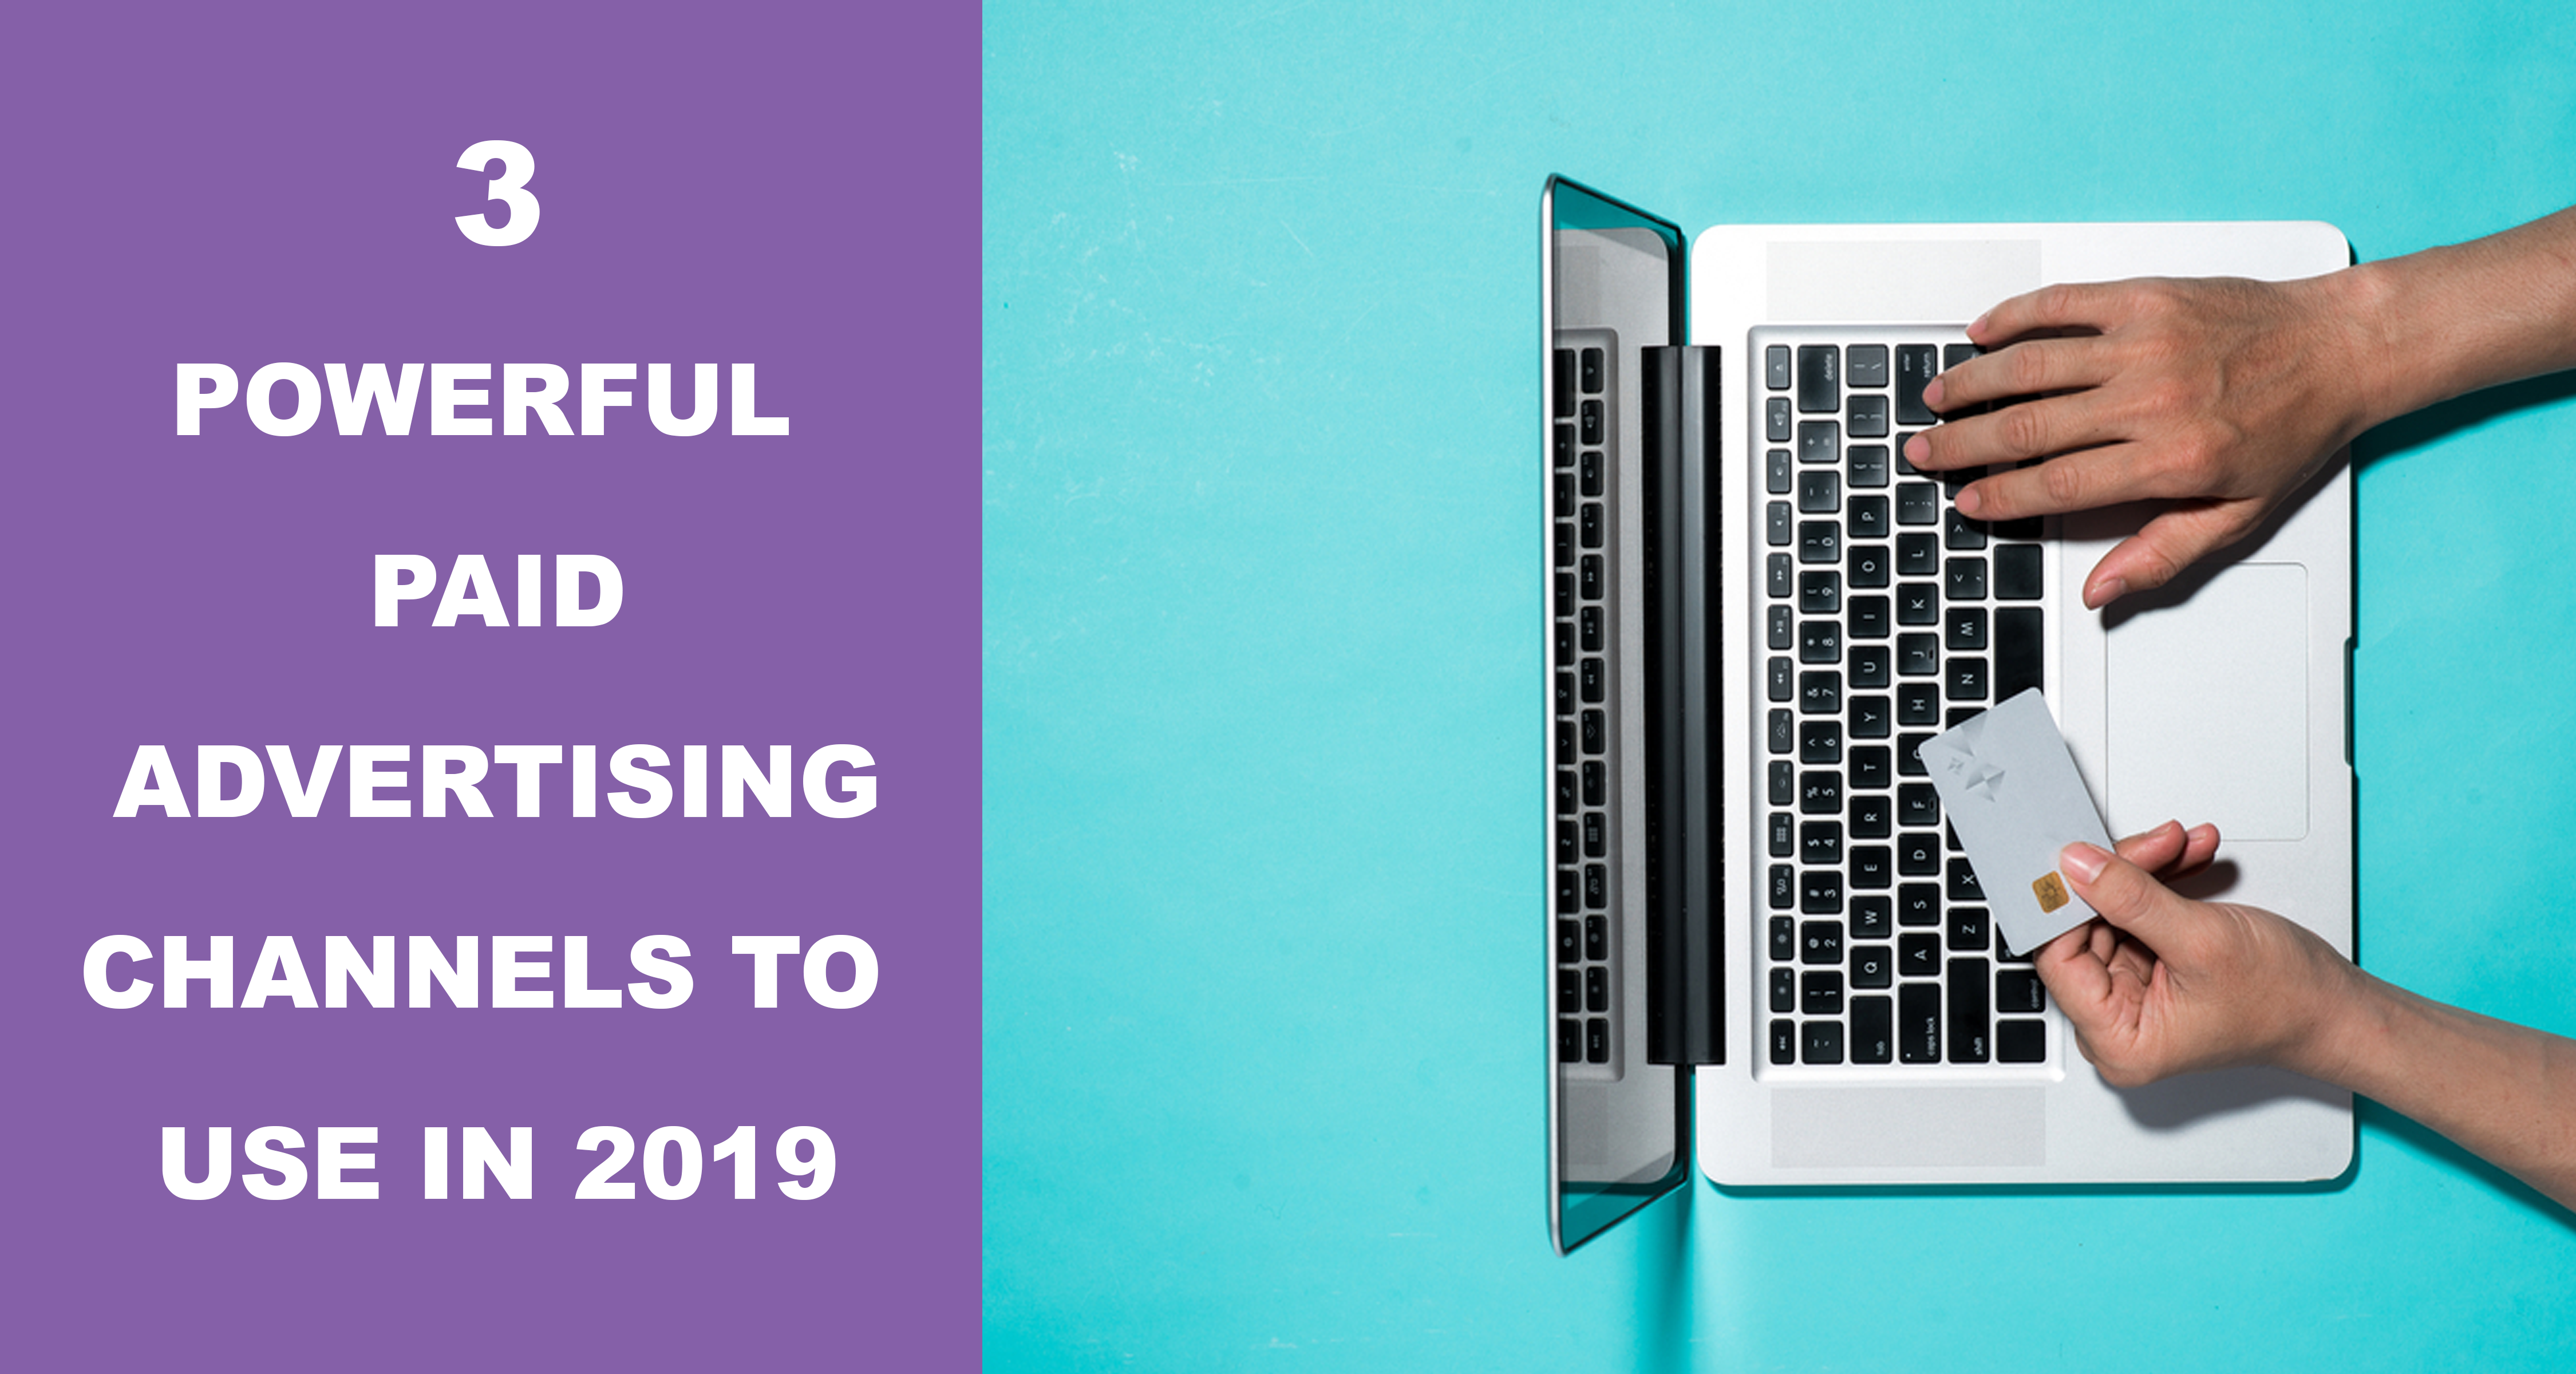 3 Best Powerful Paid Advertising Channels To Use In 2019